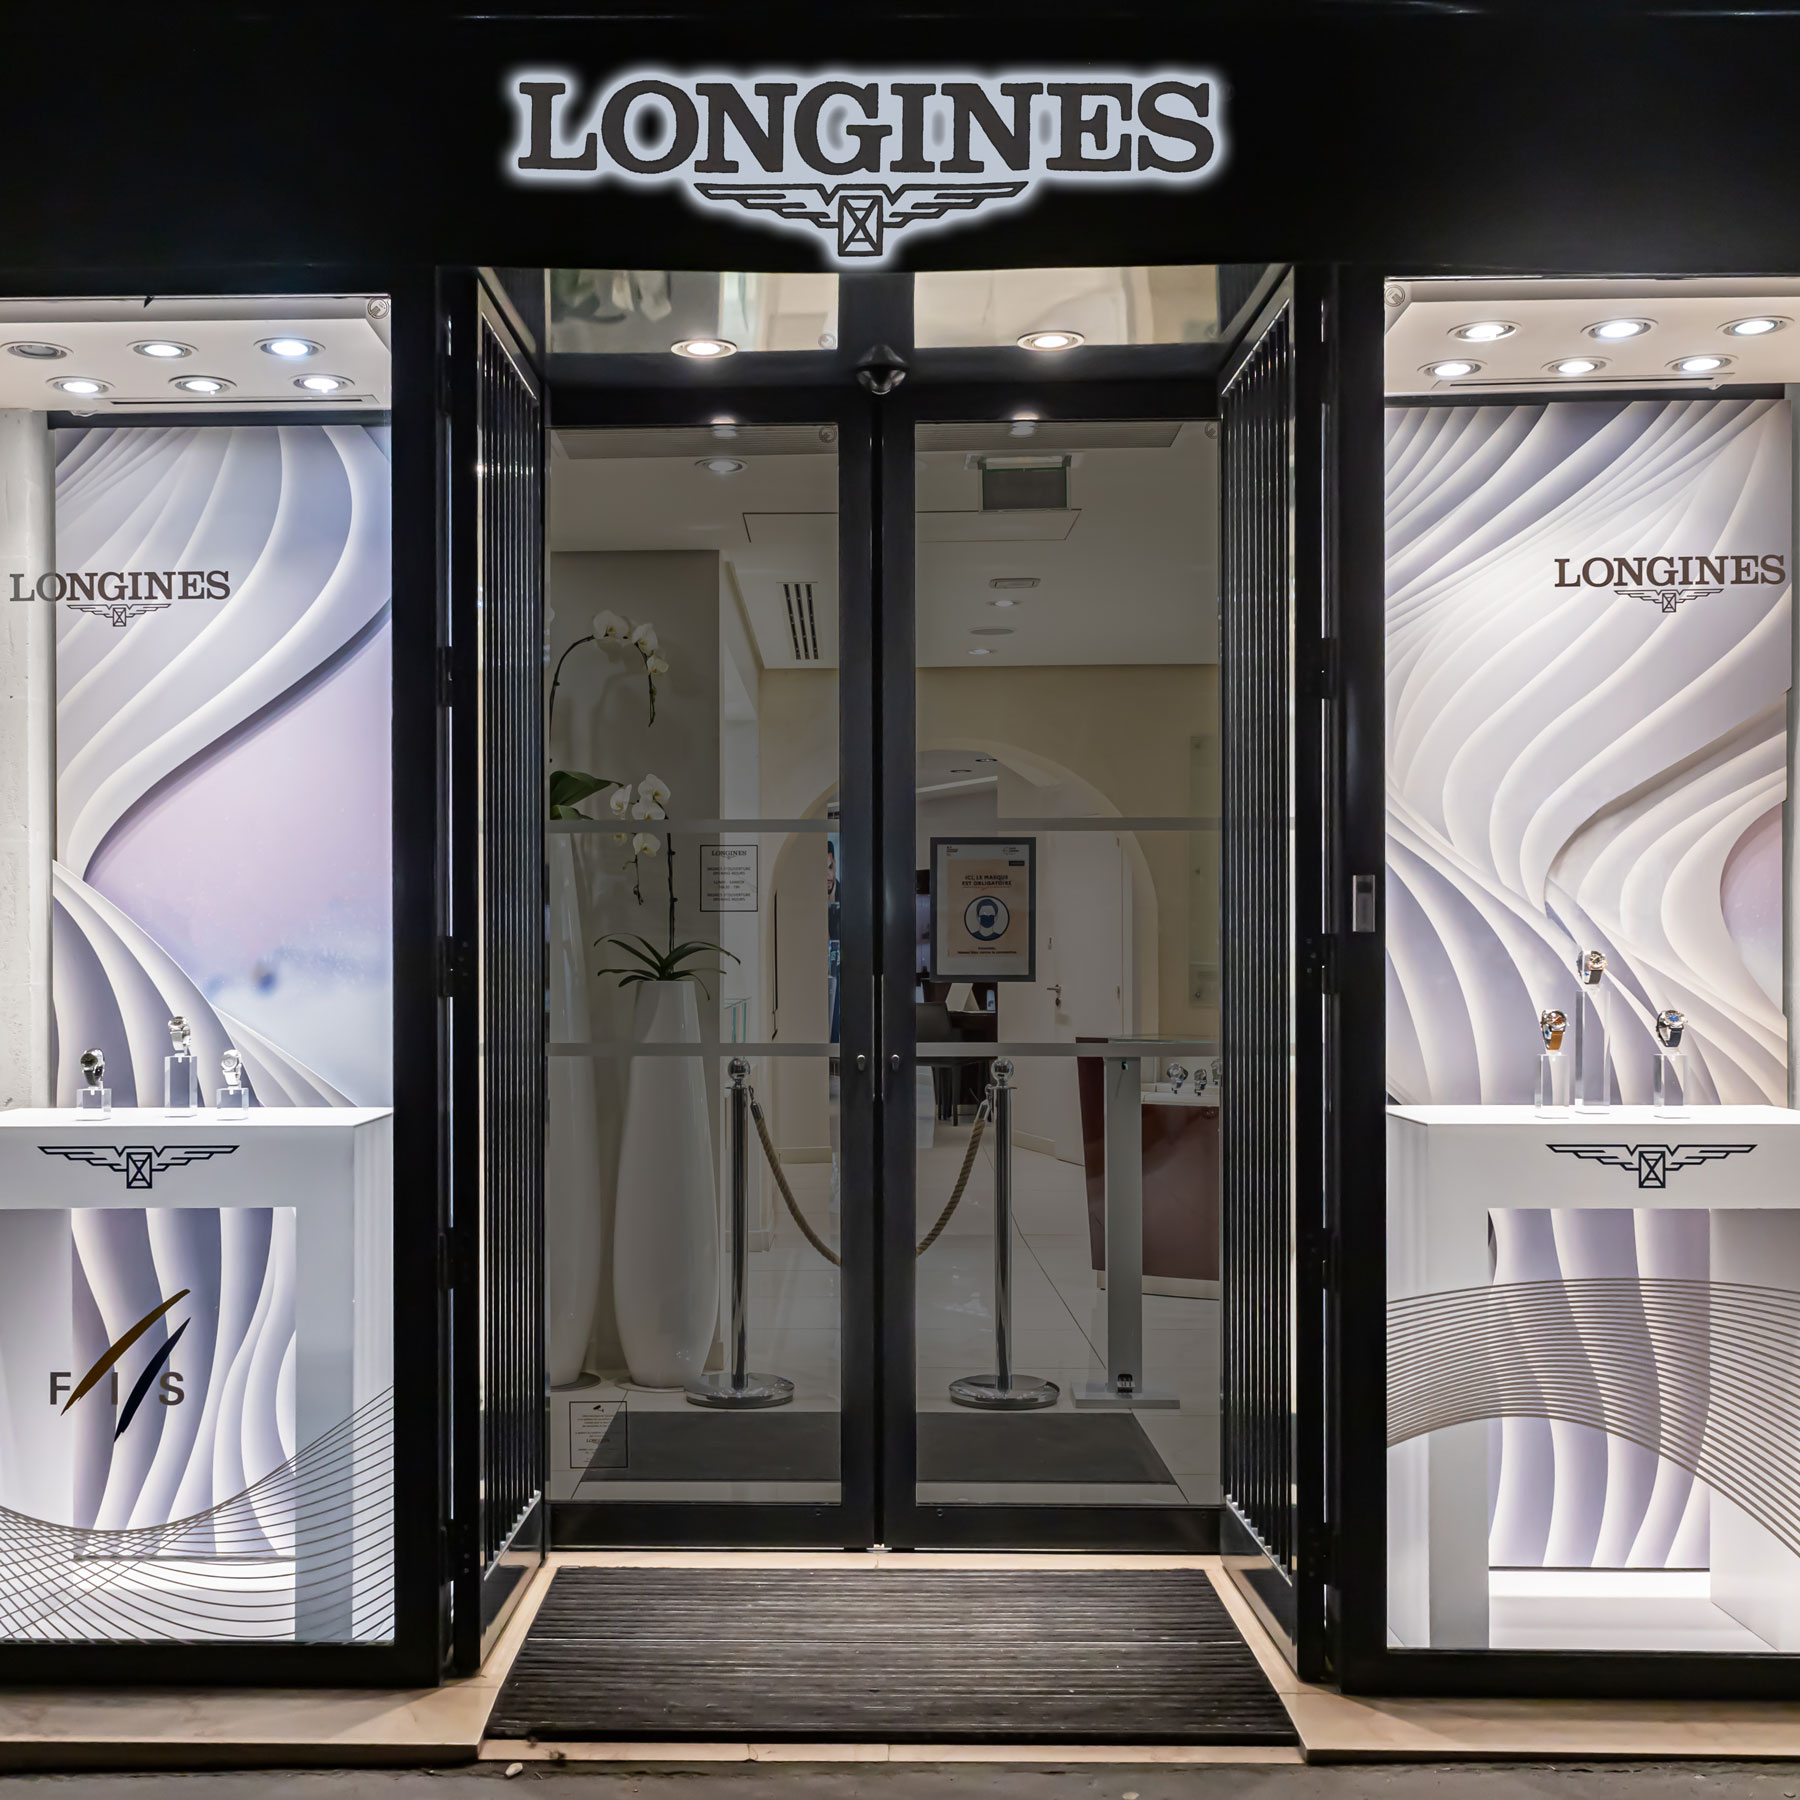 Dfrost, Longines, Window Campaigns, Window Campaign, POS Campaign, Window Rollout, Retail Marketing Campaign, Jewellery, Watches, Luxury, Visual Merchandising, Strategic Visual Merchandising, Ski Campaign